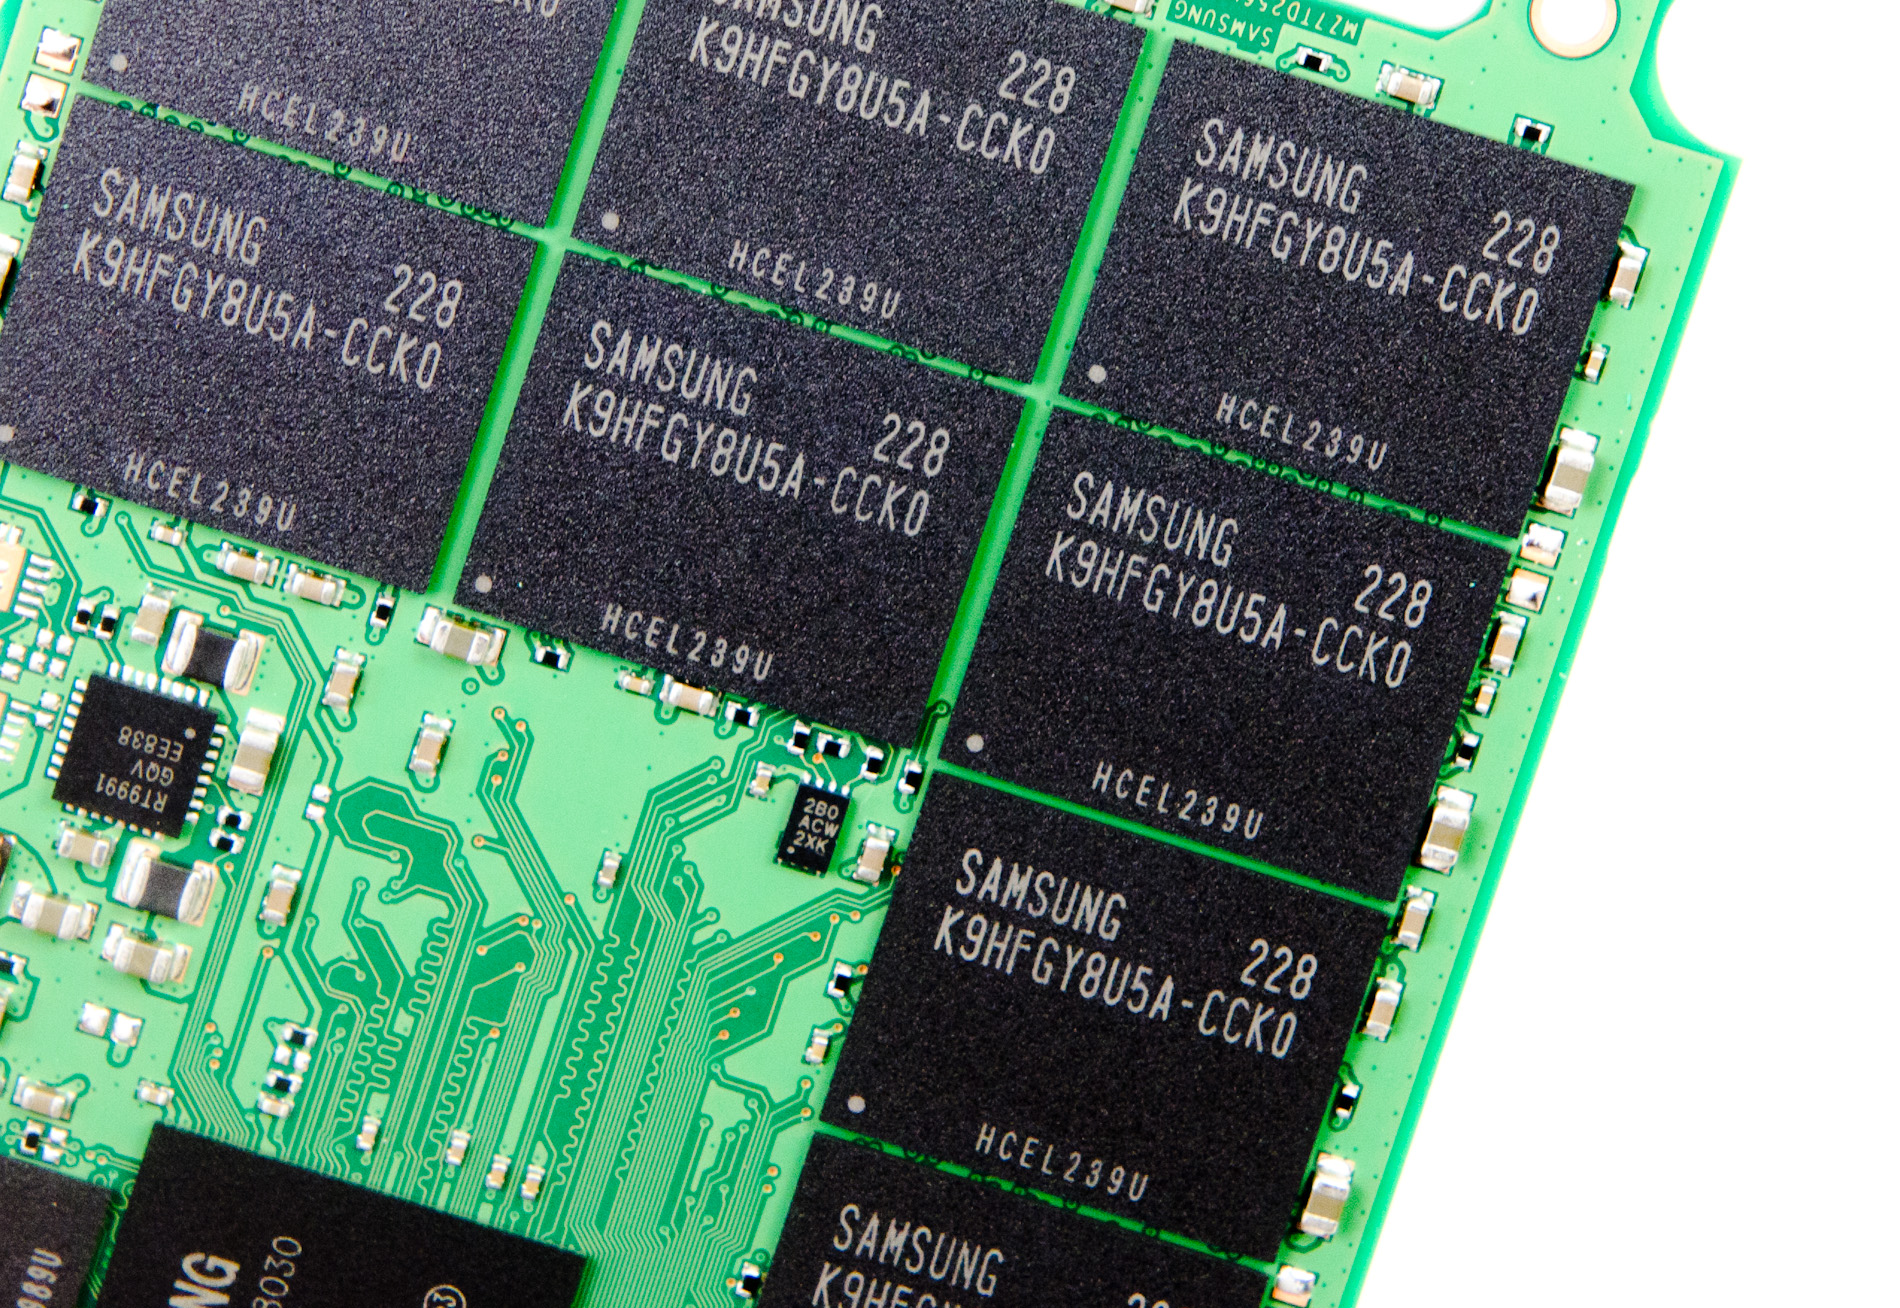 Samsung SSD 840 Pro Review